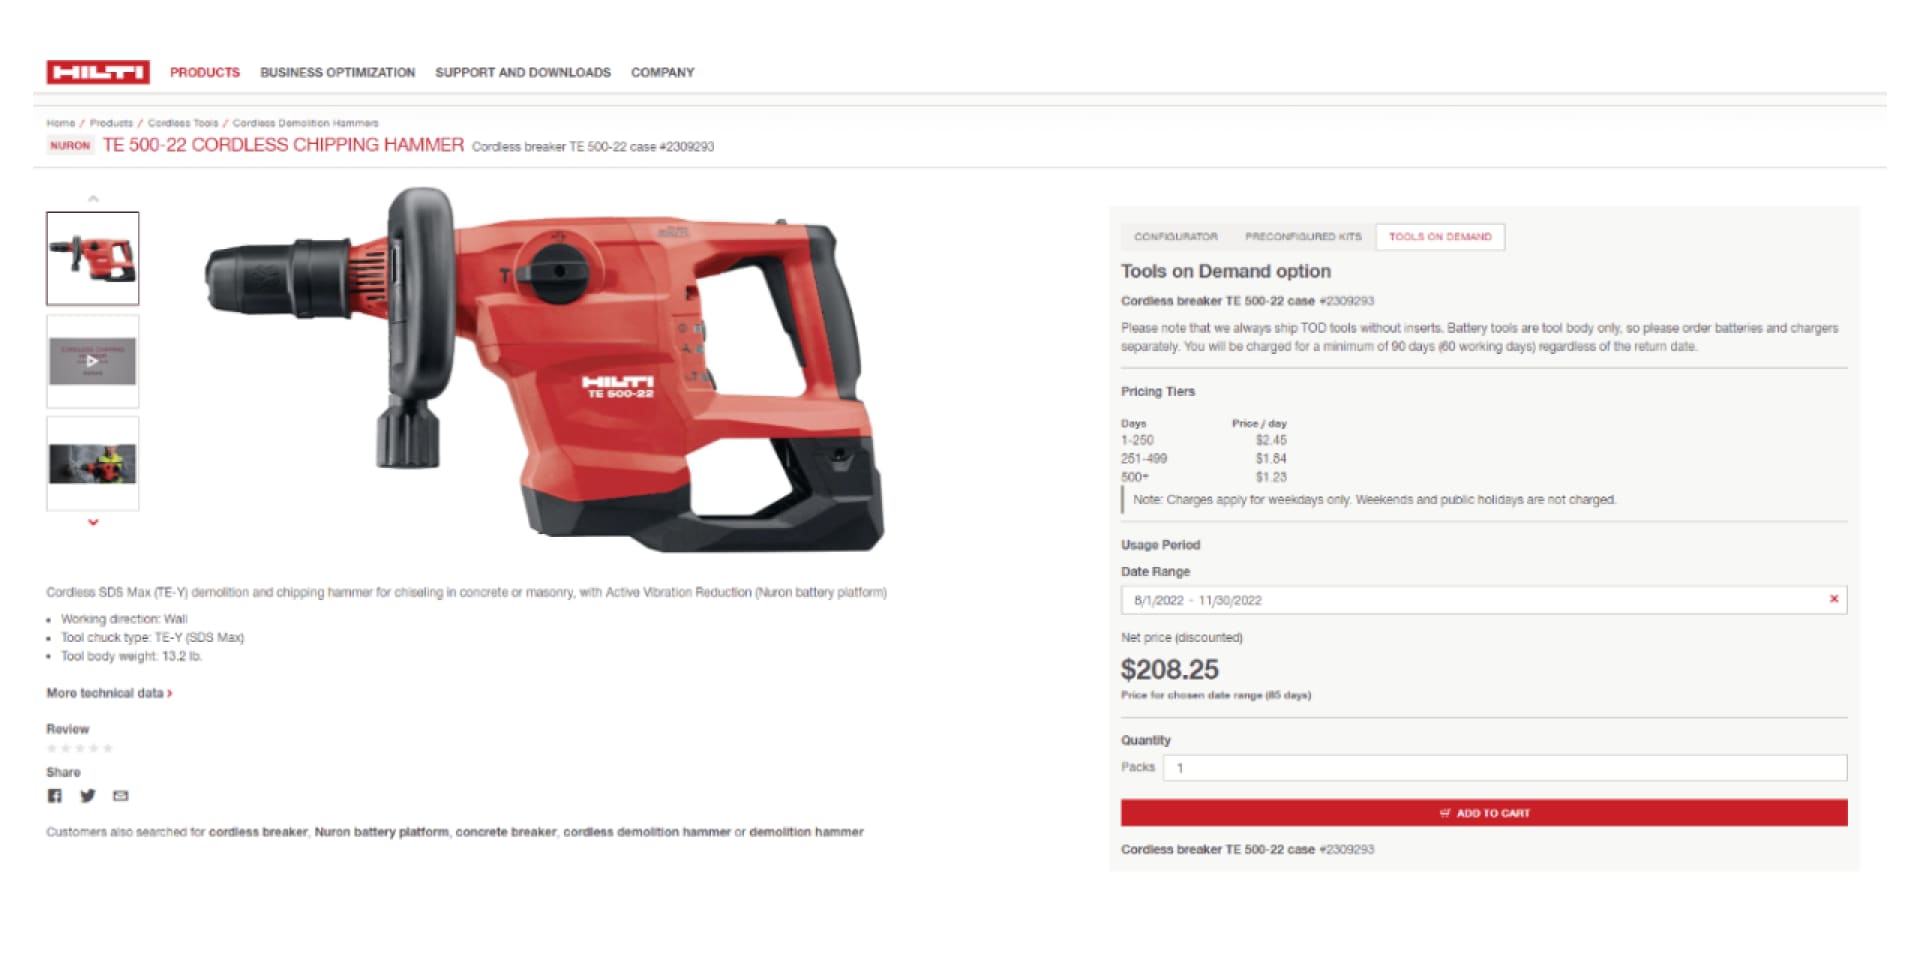 https://www.hilti.com/content/hilti/W1/US/en/business/business/equipment/fleet/tools-on-demand/_jcr_content/childSections/childsection_2124742407/three_image_text_col/image_text_column_1/image.img.1920.medium.png/1656708499032.png